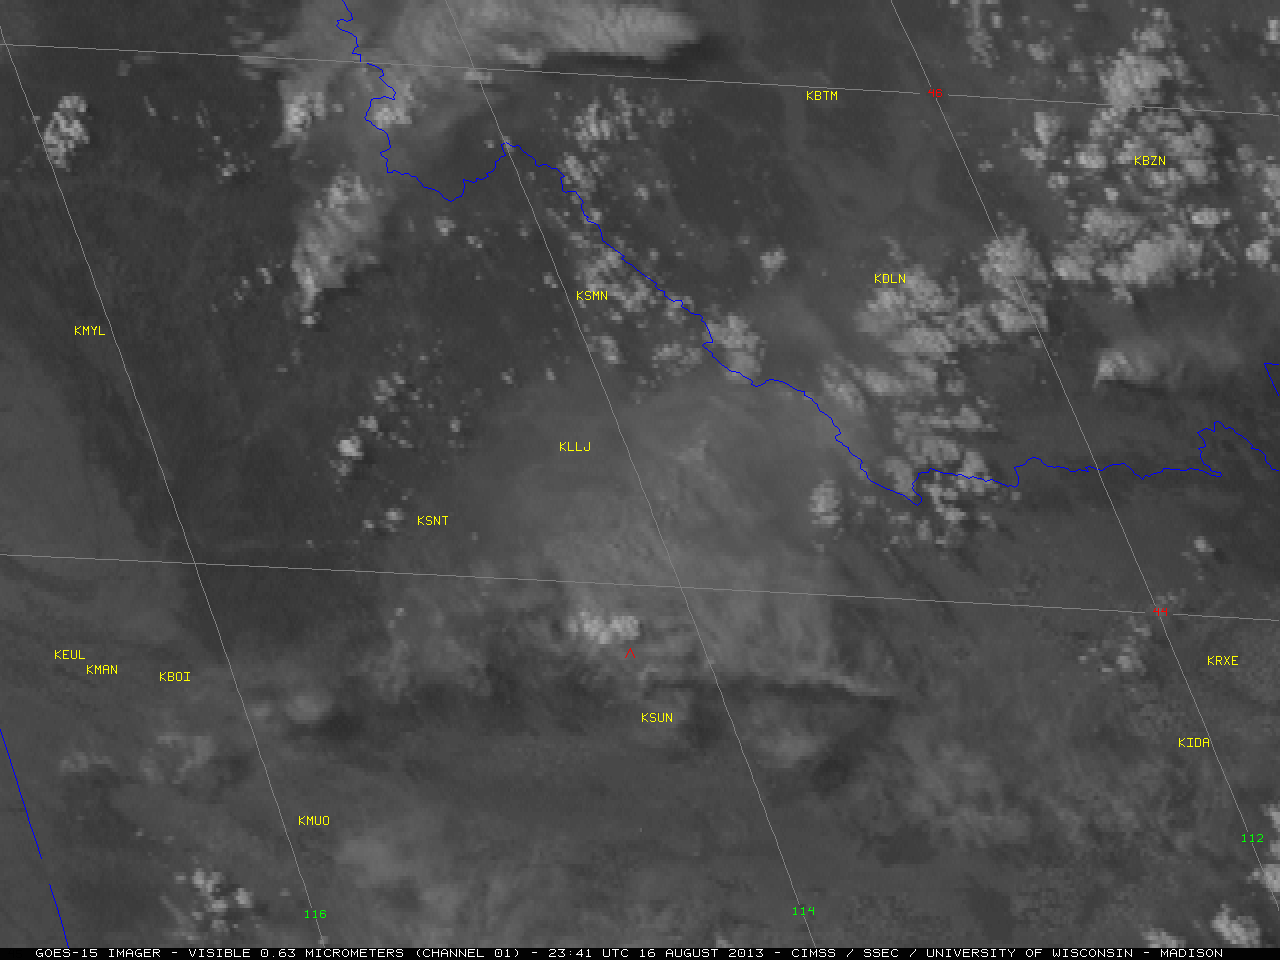 GOES-15 0.63 µm visible channel images (click image to play animation)